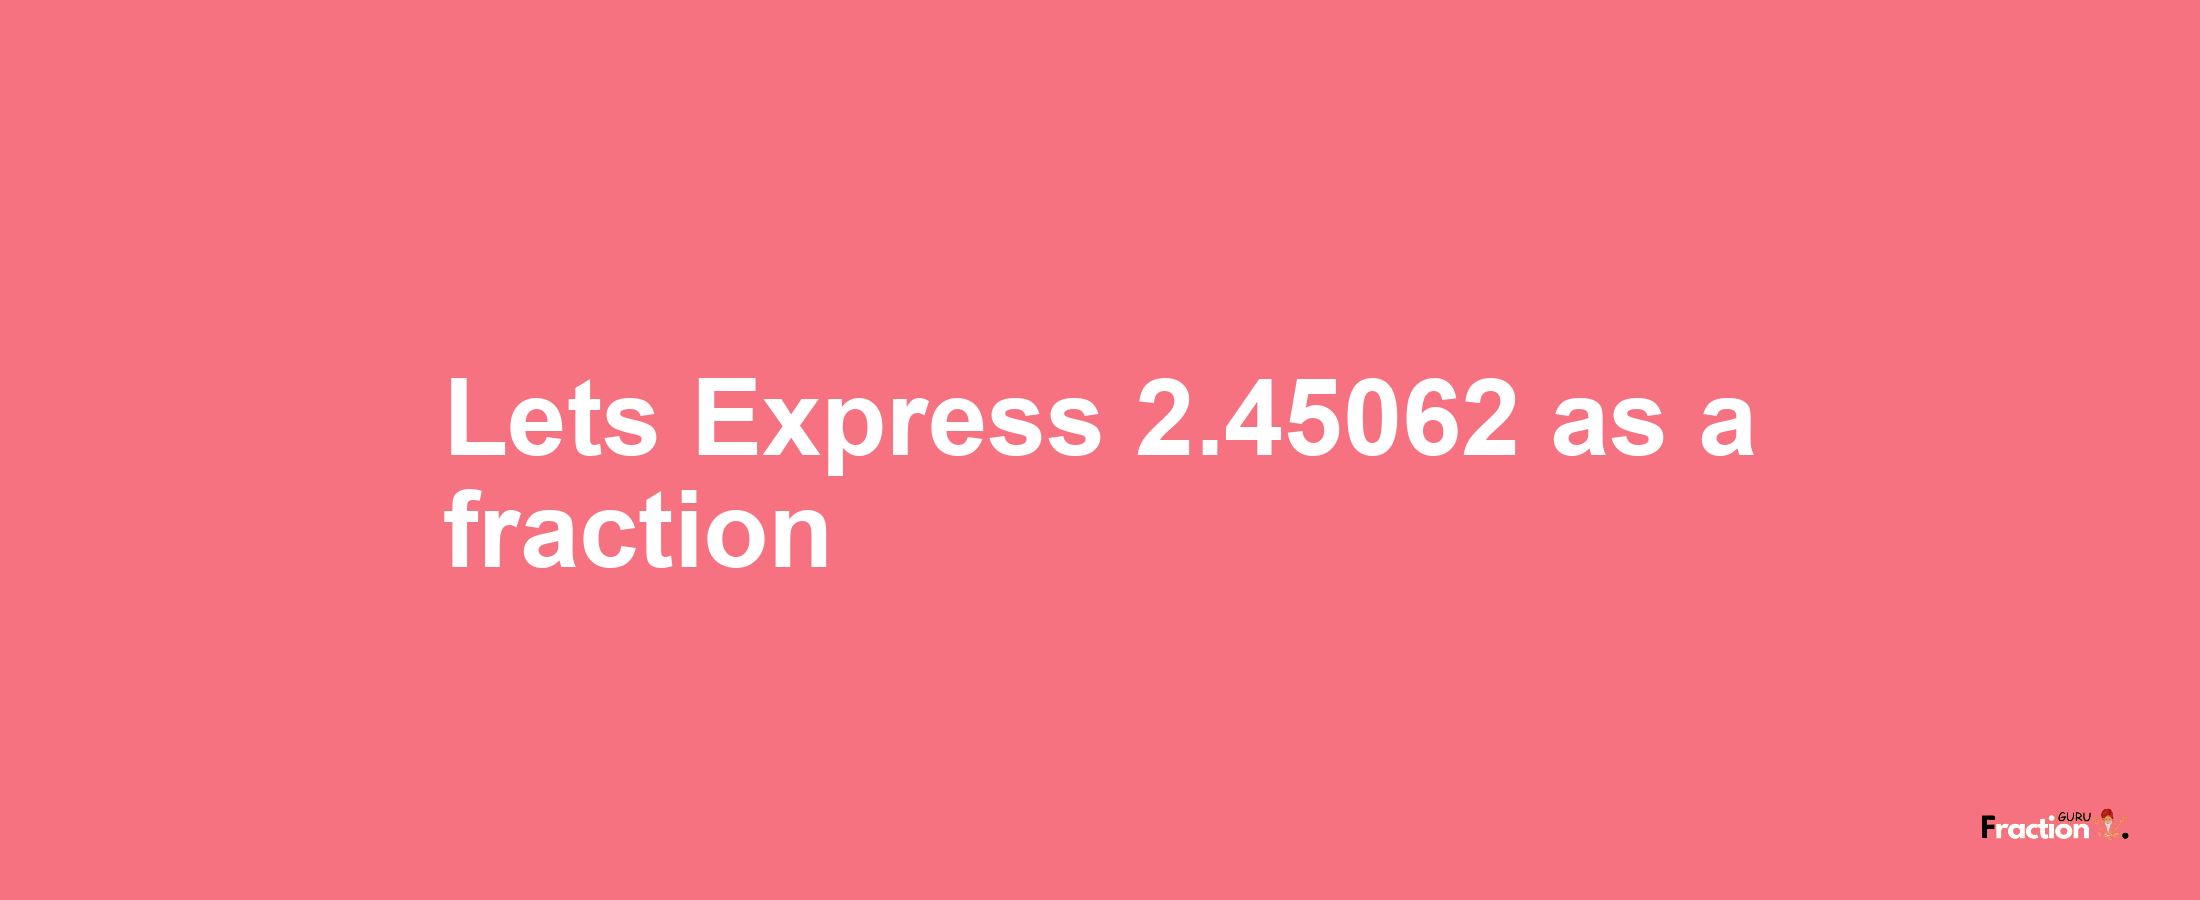 Lets Express 2.45062 as afraction